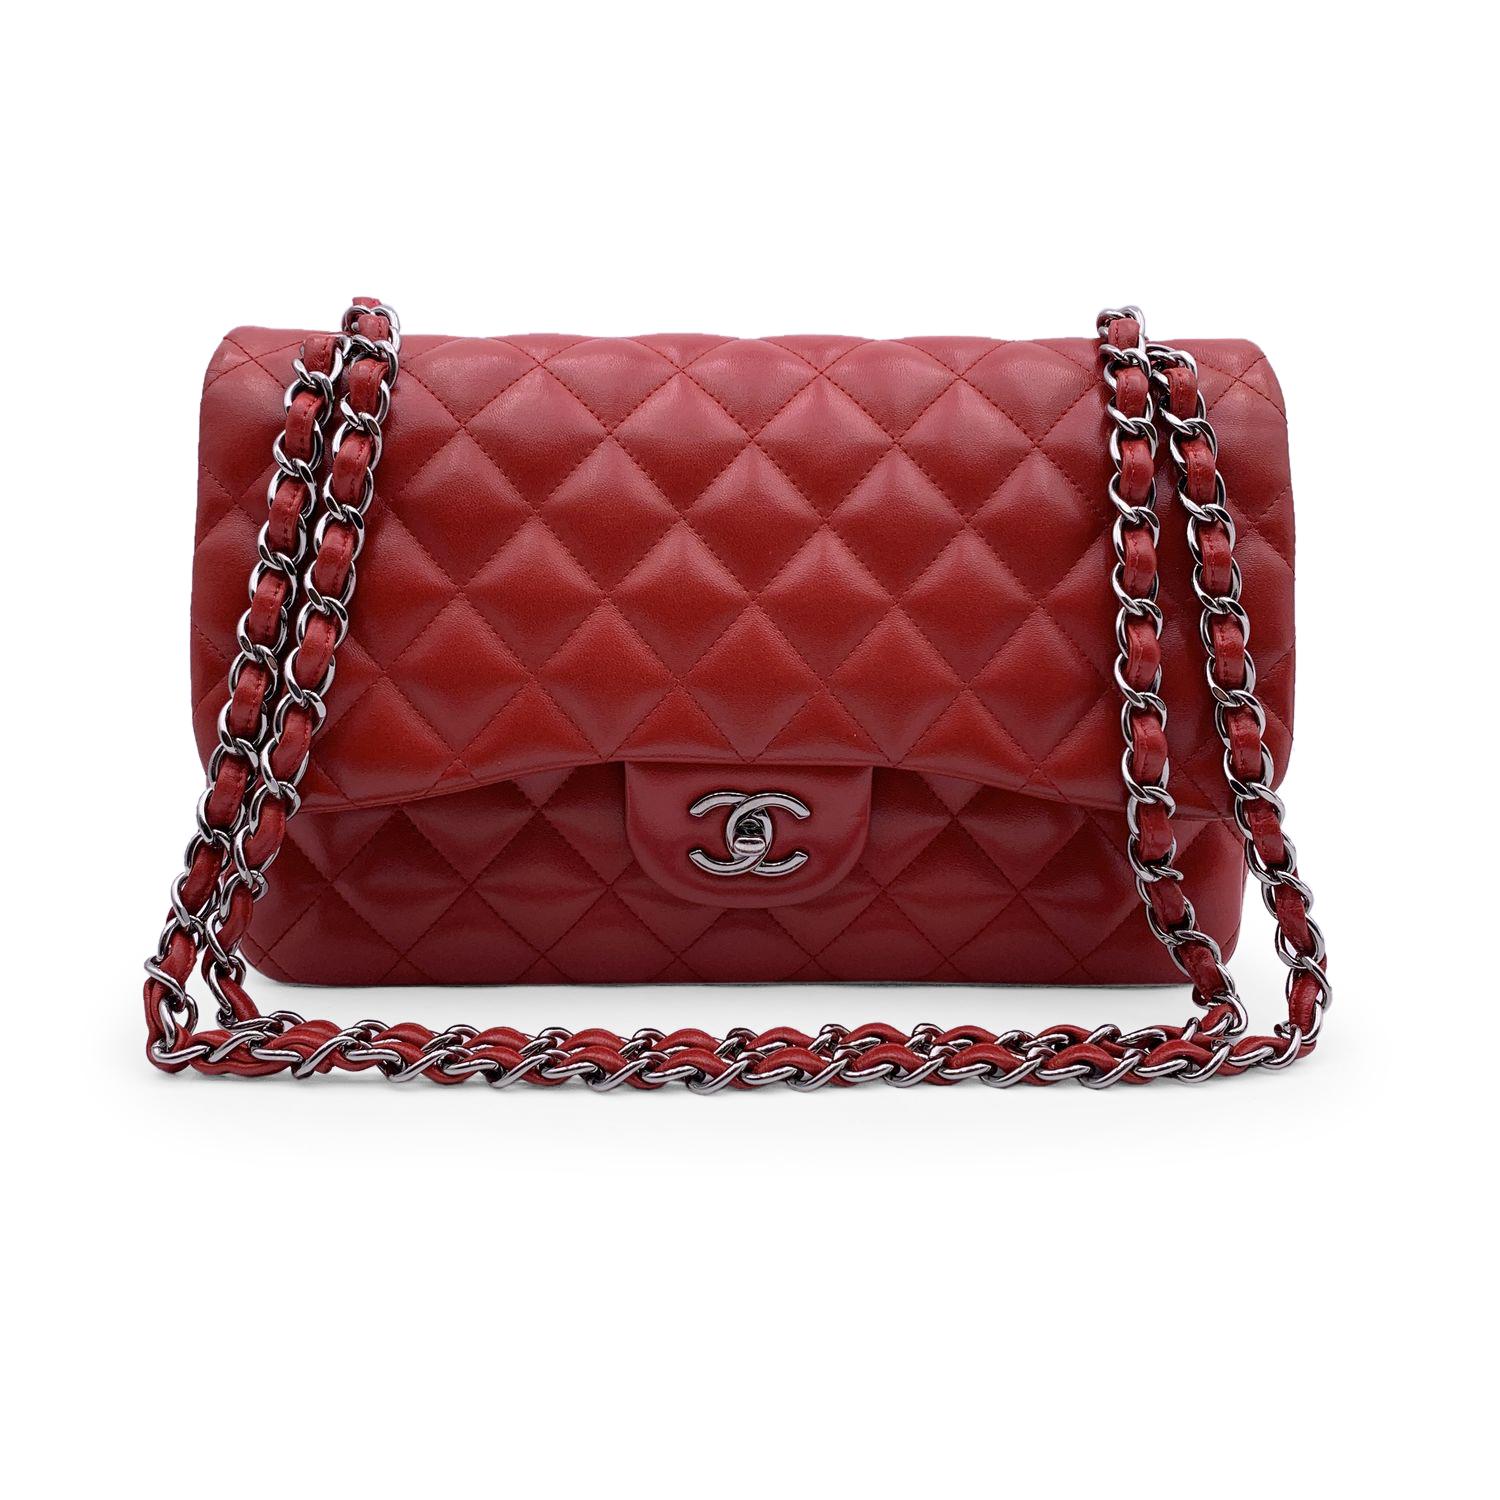 Chanel 'Timeless Classic - Jumbo'. Quilted Double Flap Bag in Red color. Periord/Era: 2014-2015. Features double 'CC' turn lock closure and double flap interior. 1 open pocket under the flap. Gorgeous silver metal strap with interwoven leather; can